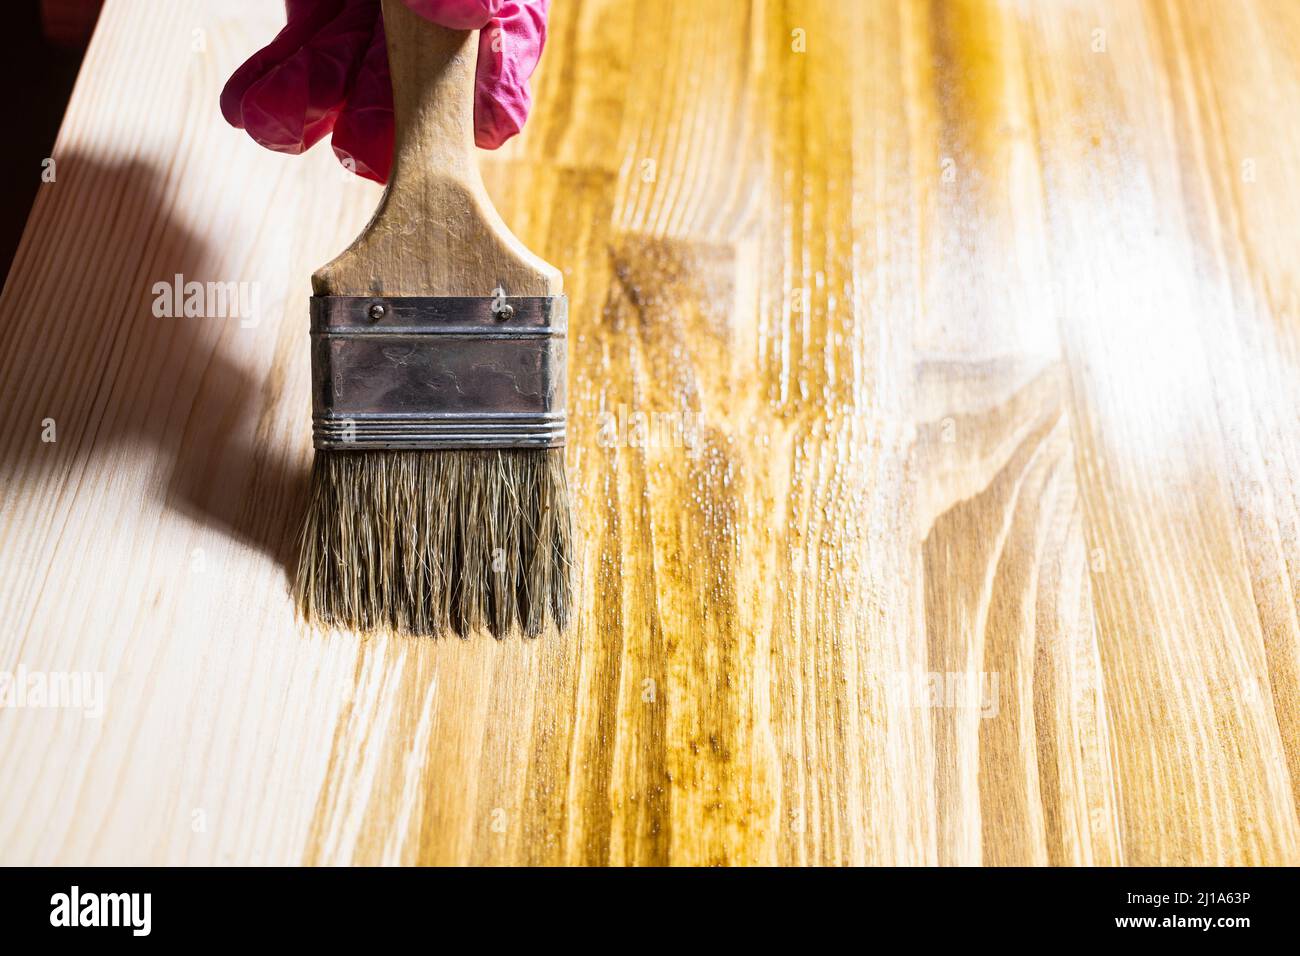 wooden board is covered with wood stain by paint brush close up at home Stock Photo